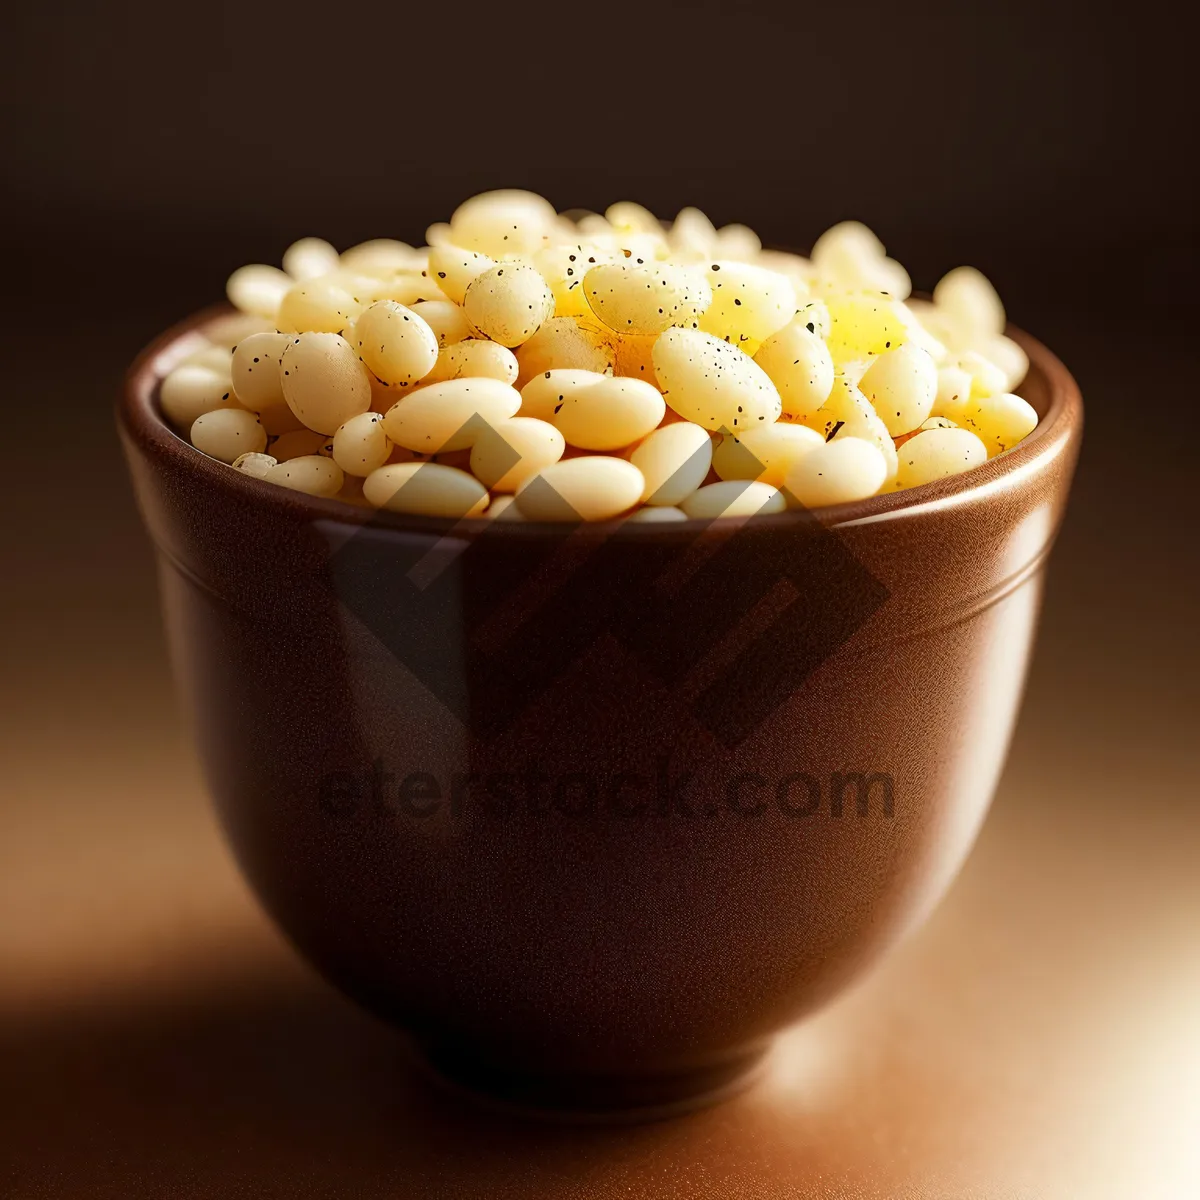 Picture of Organic Corn Bowl with Delicious Egg